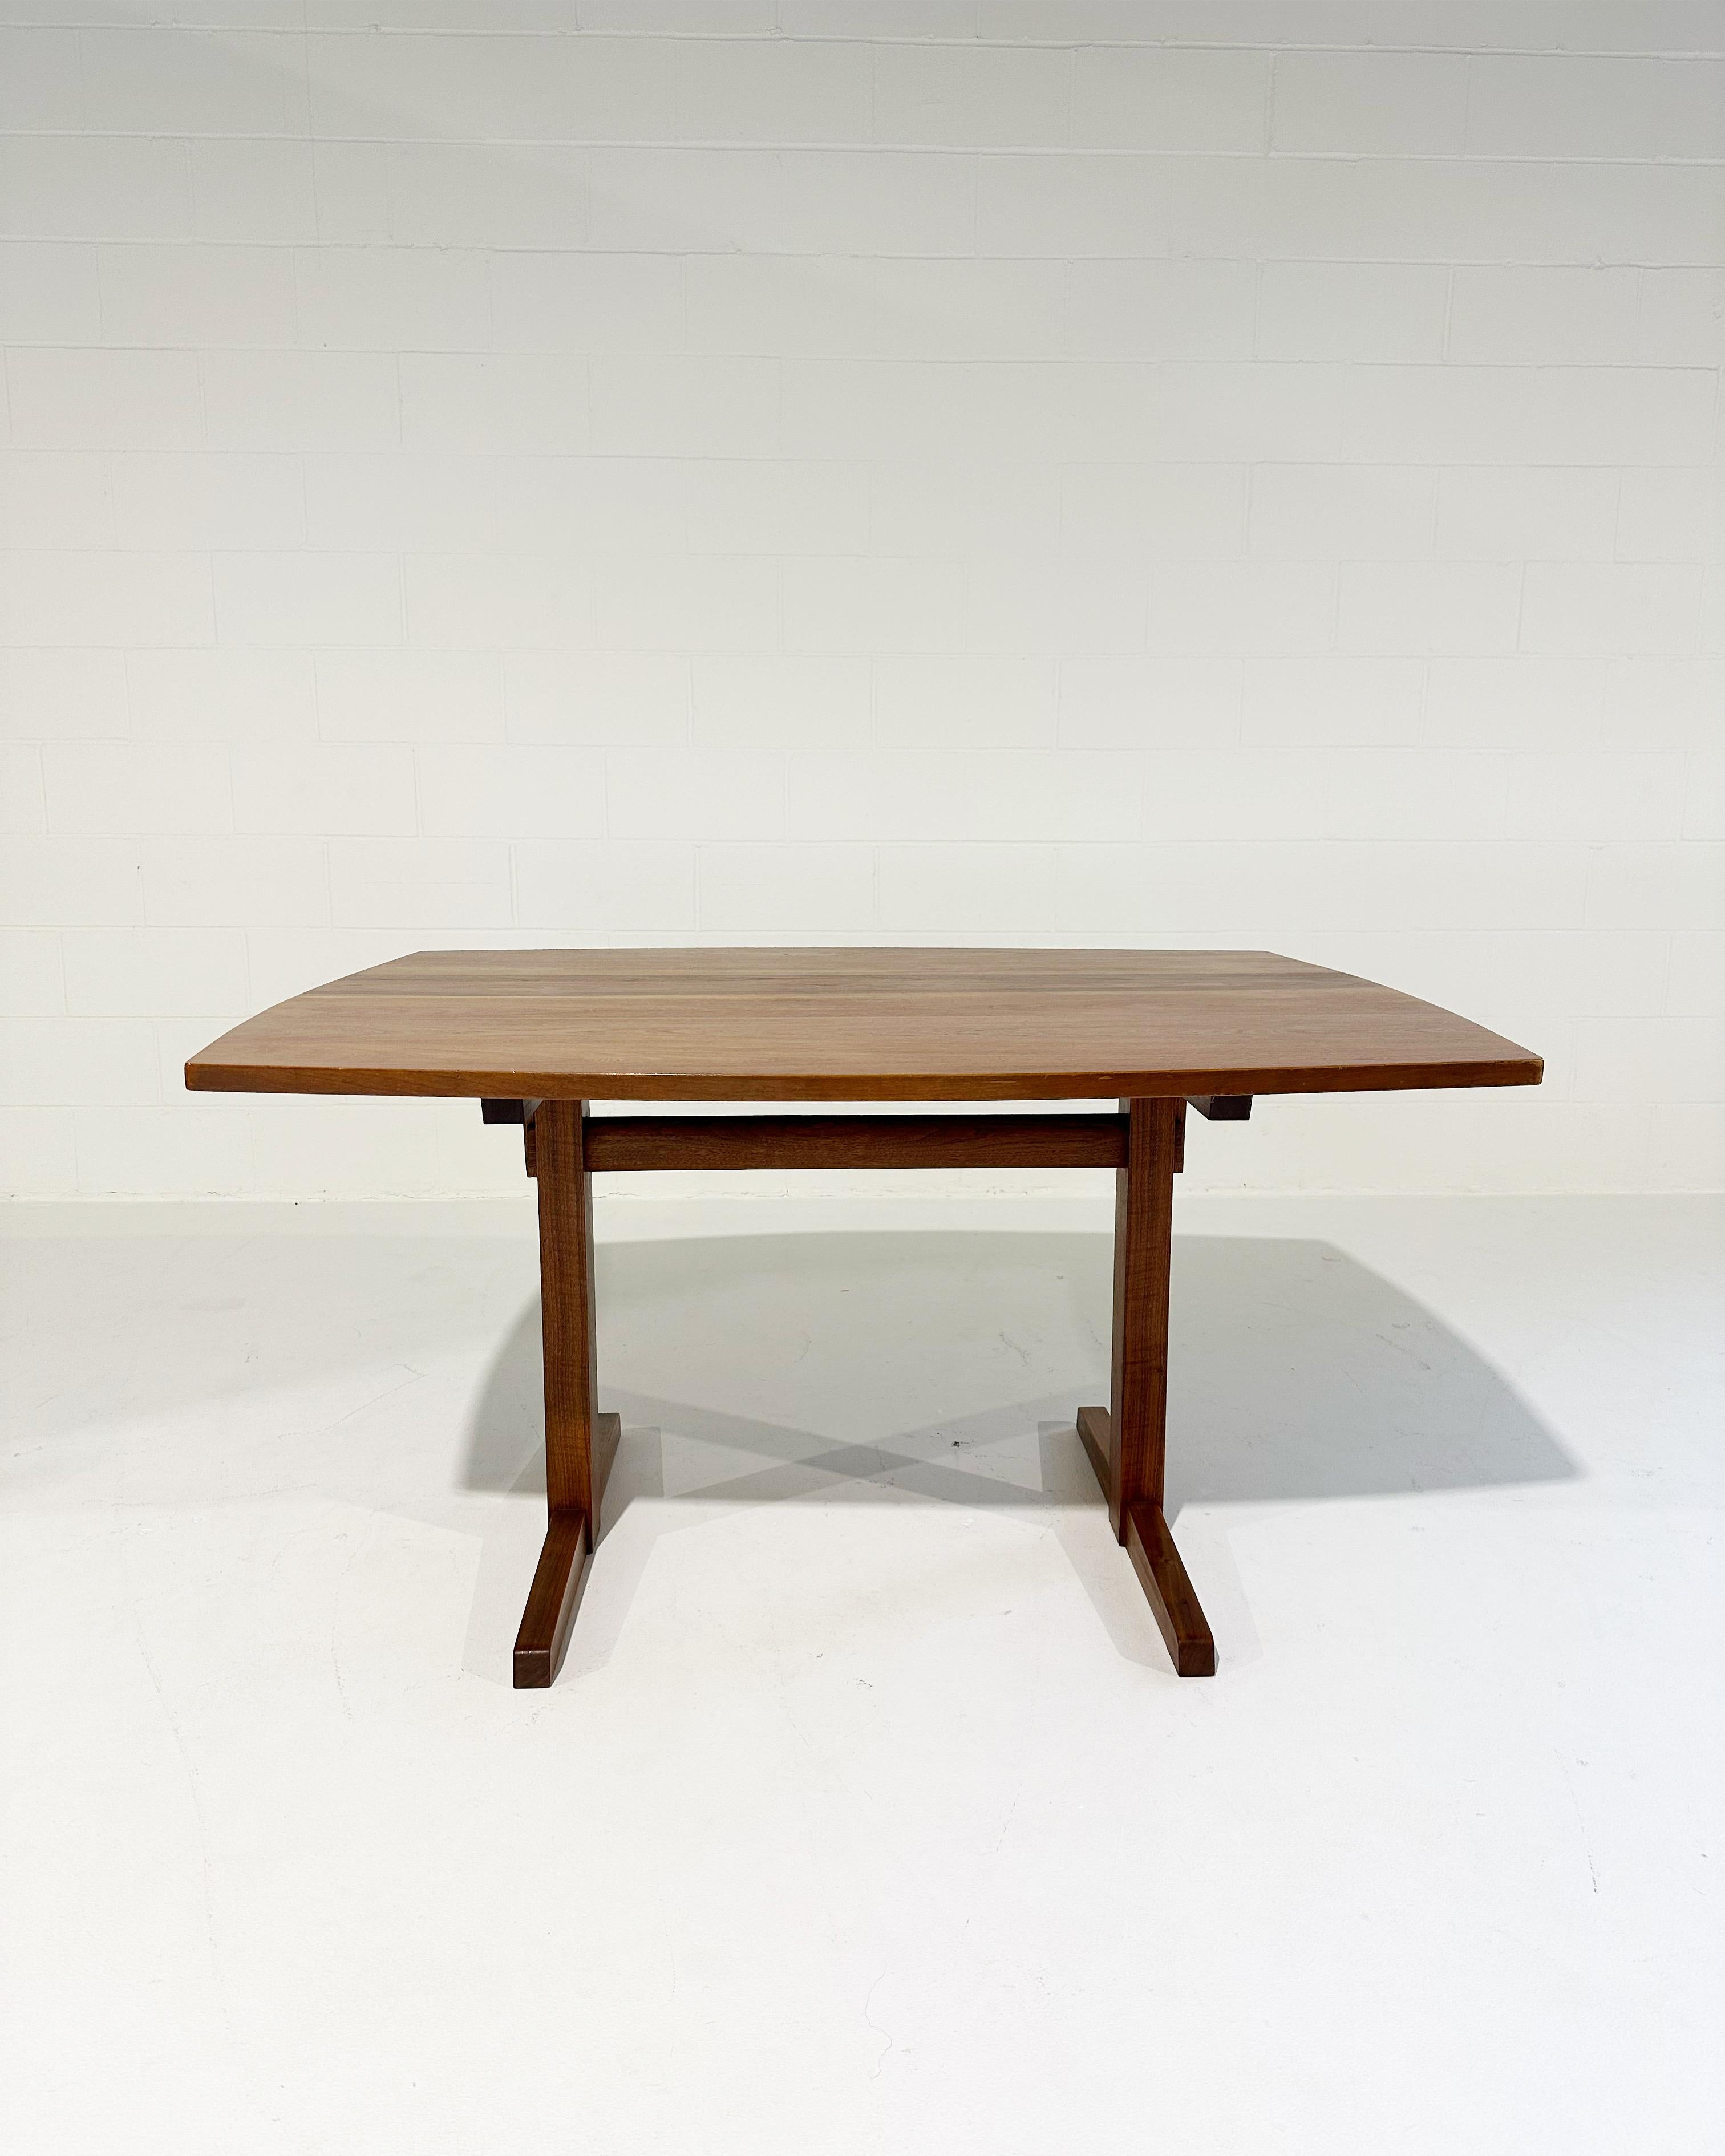 A beautiful piece. Table features a six-plank top with sap grain details. Signed with client's name to underside ‘Dr. Chan’. 

Manufacturer
Nakashima Studio, USA

Date
1968

Dimensions
54 W × 41.75 D × 28.5 H in

Material
Cherry,